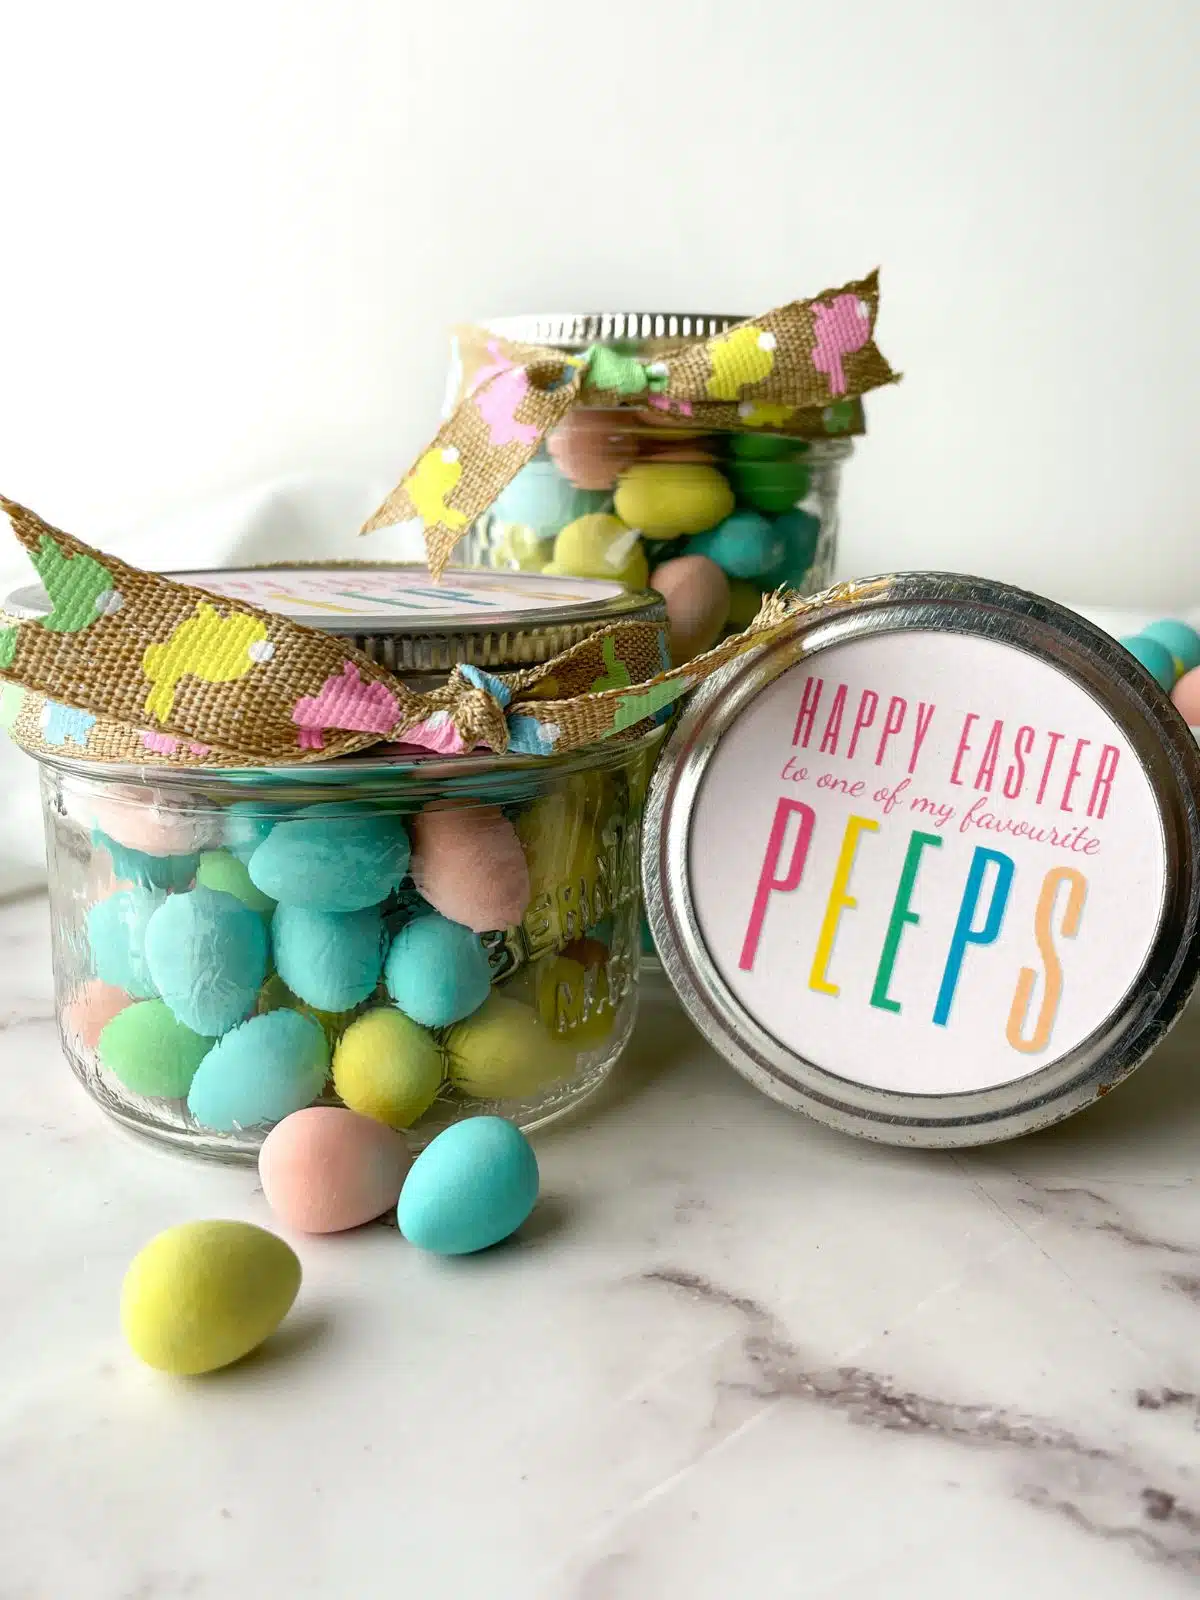 Snack idea for Easter with free printable labels.